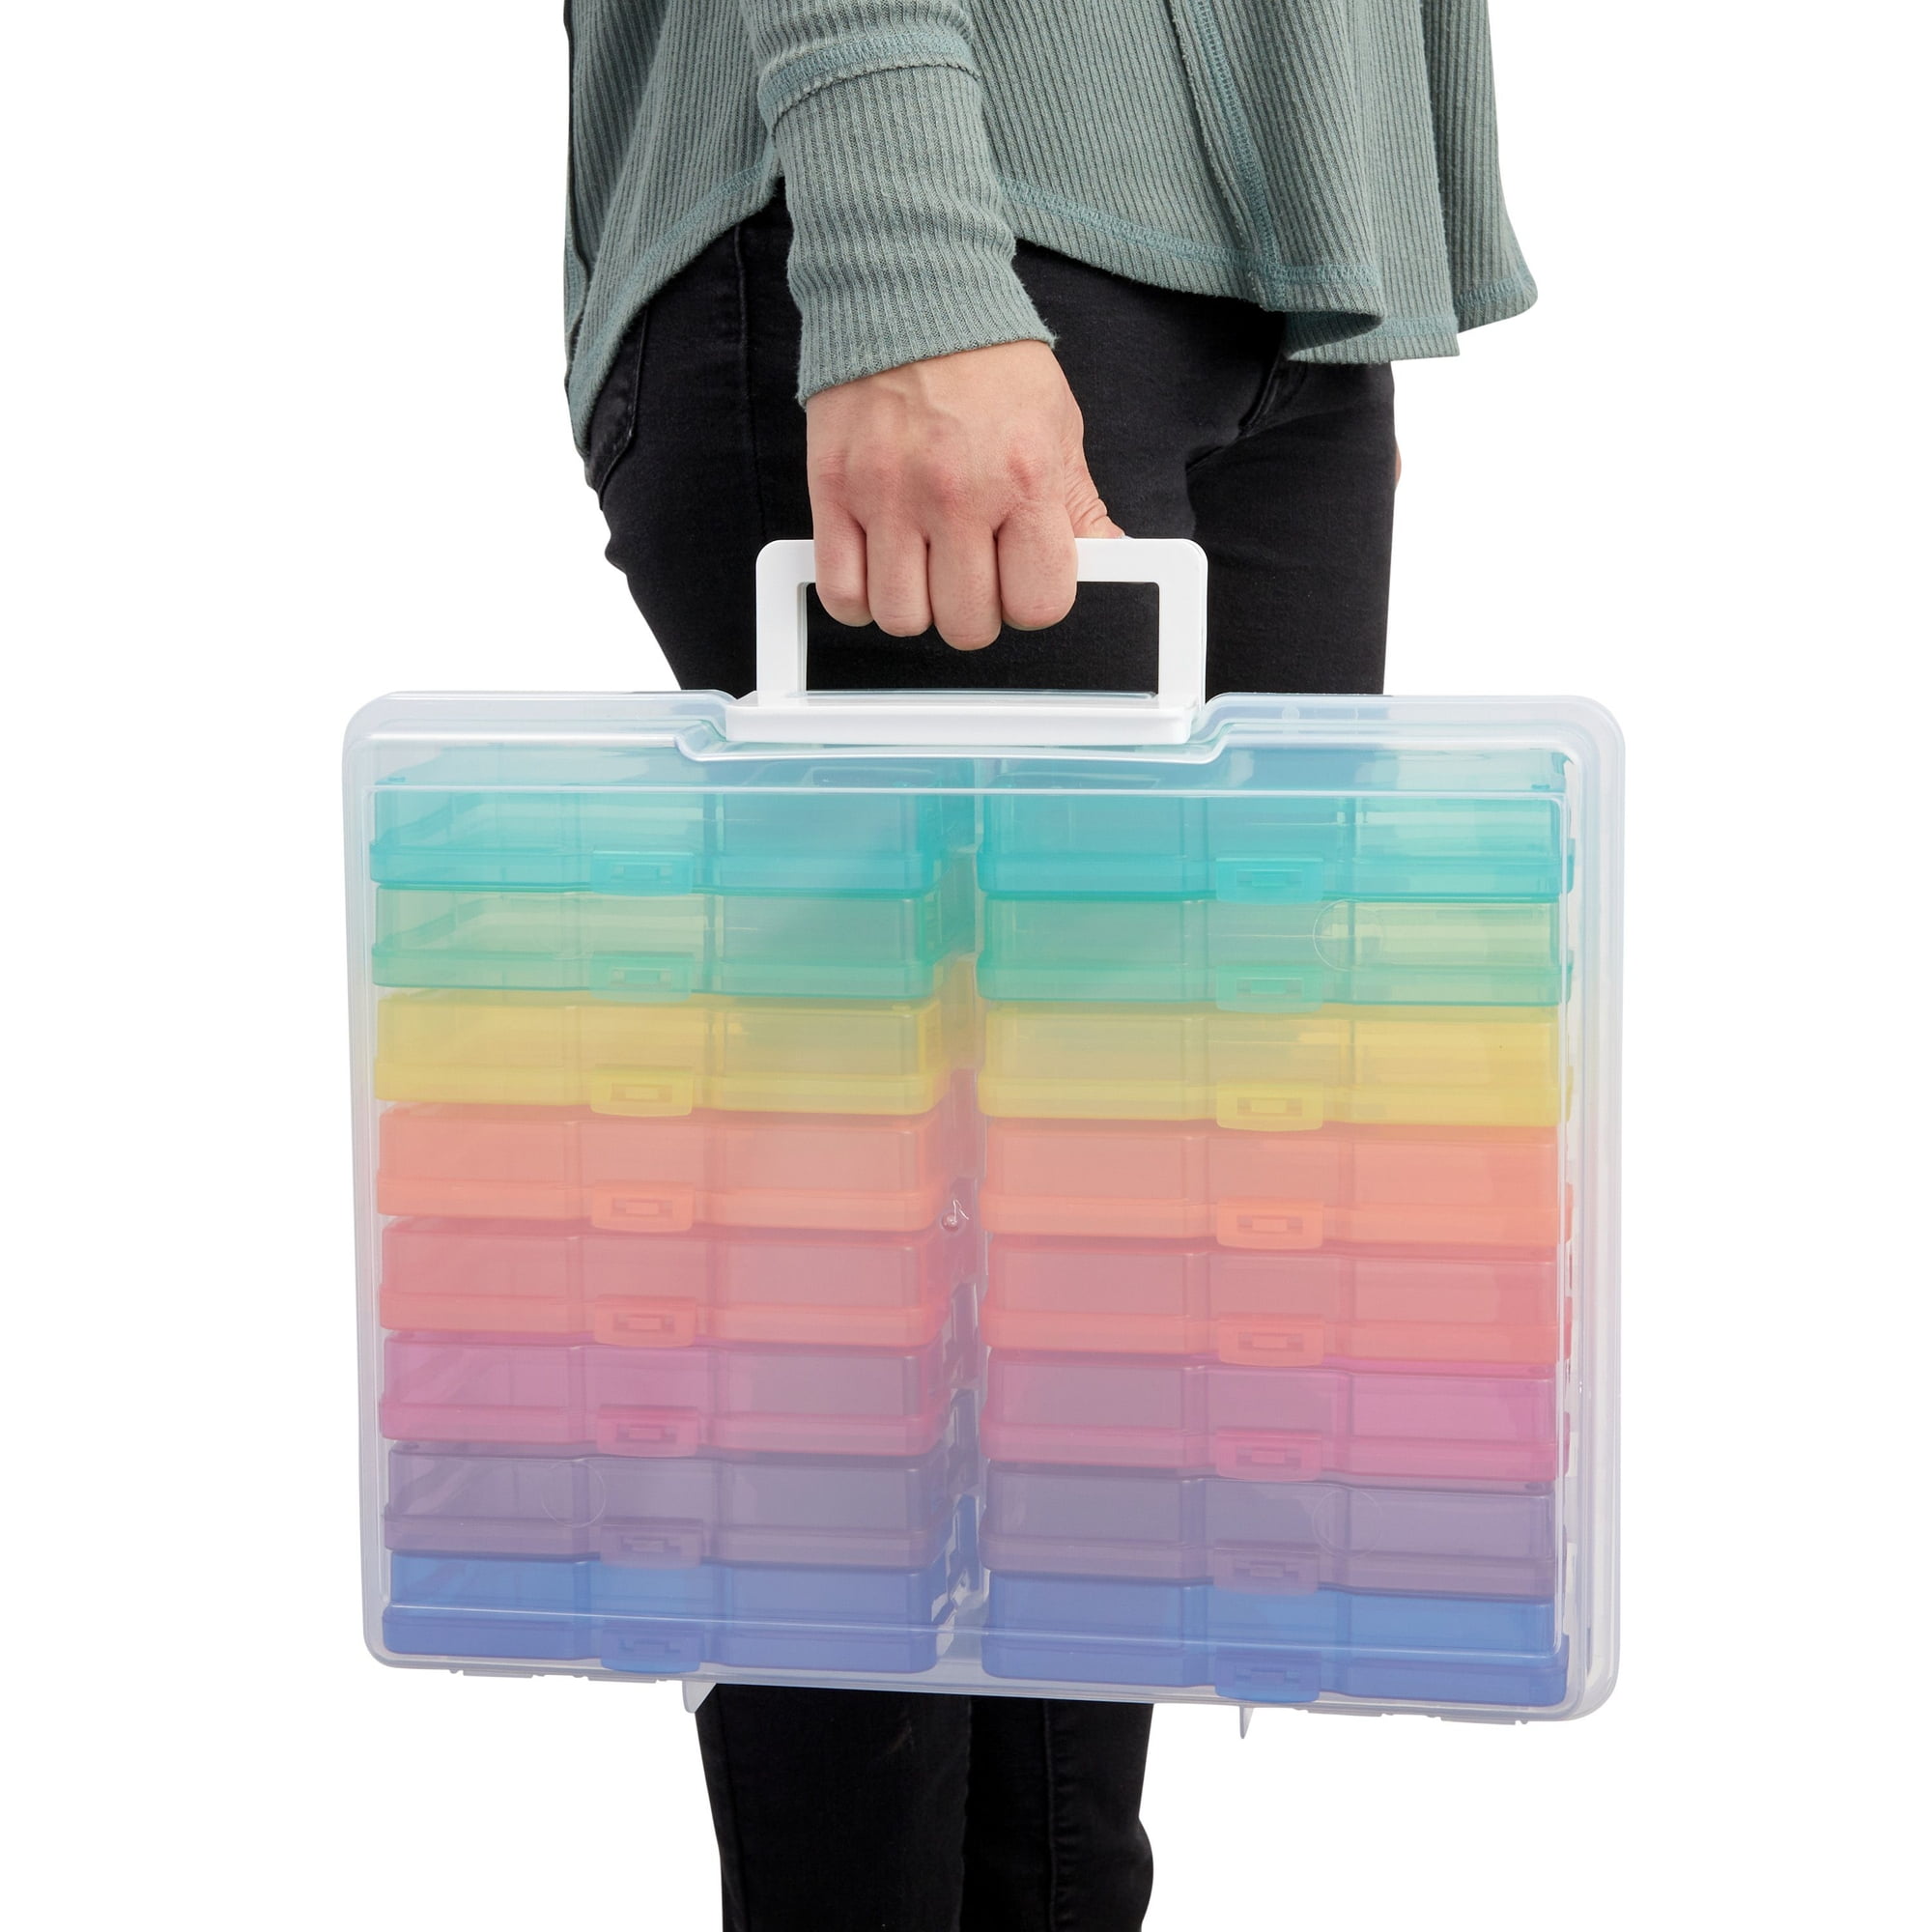 Large Carrying Case With 16 Storage Boxes, 4x6 Inch Photo Box, Plastic Storage  Box, Perfect For Storing Photos, Crafts, Jewelry, Beads, Pens, Stickers,  Home And Office Organization